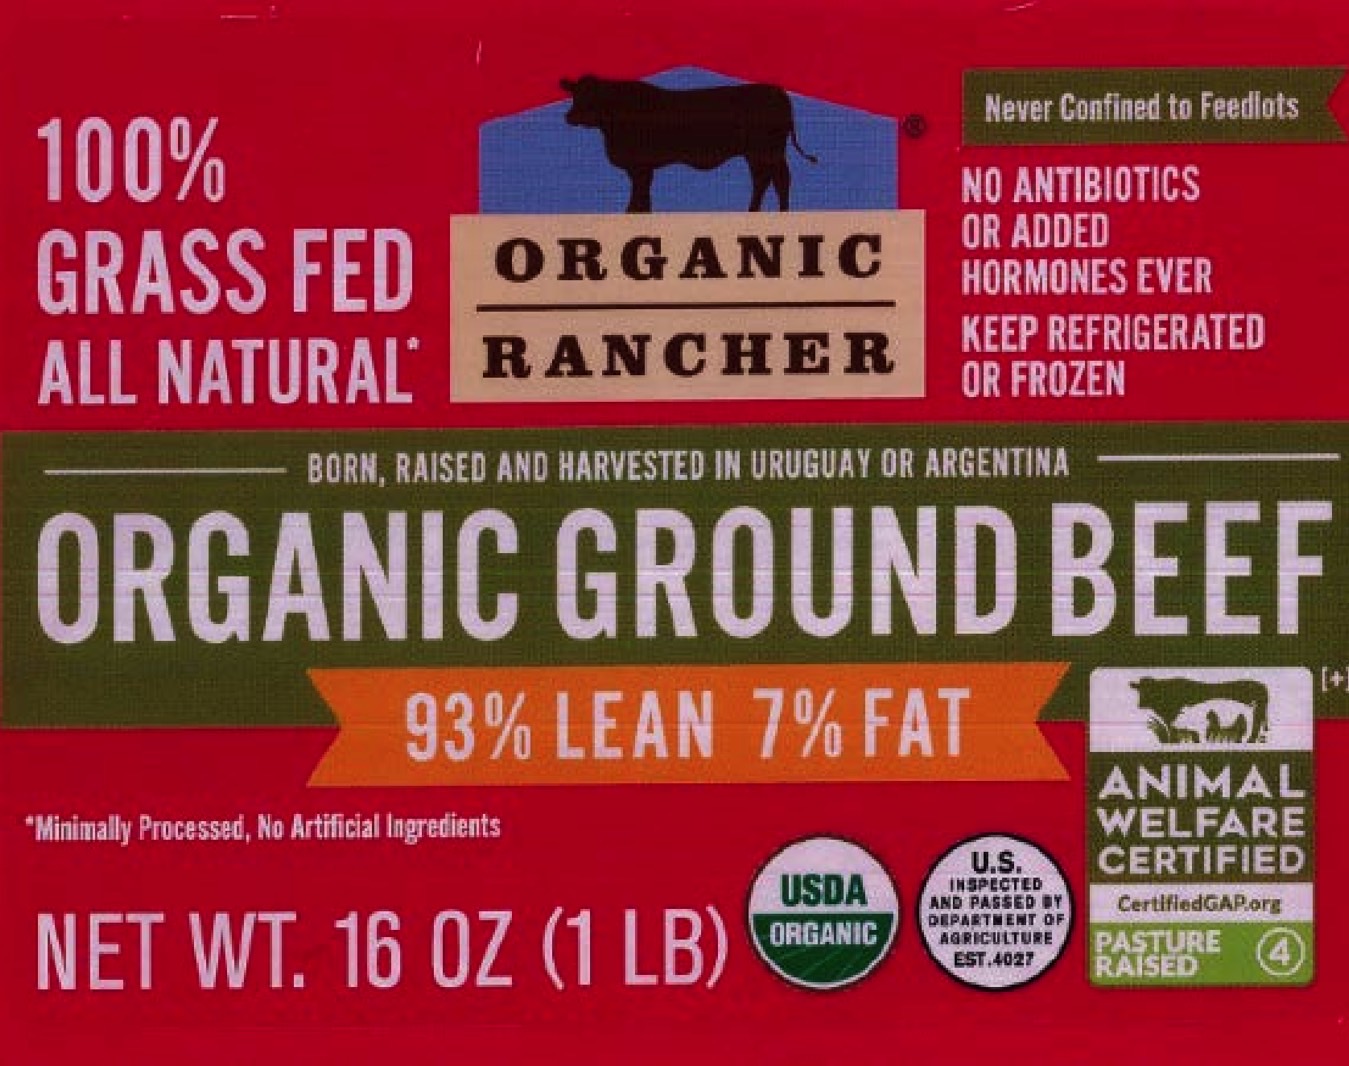 Urgent USDA health alert If you have this meat in your fridge, throw